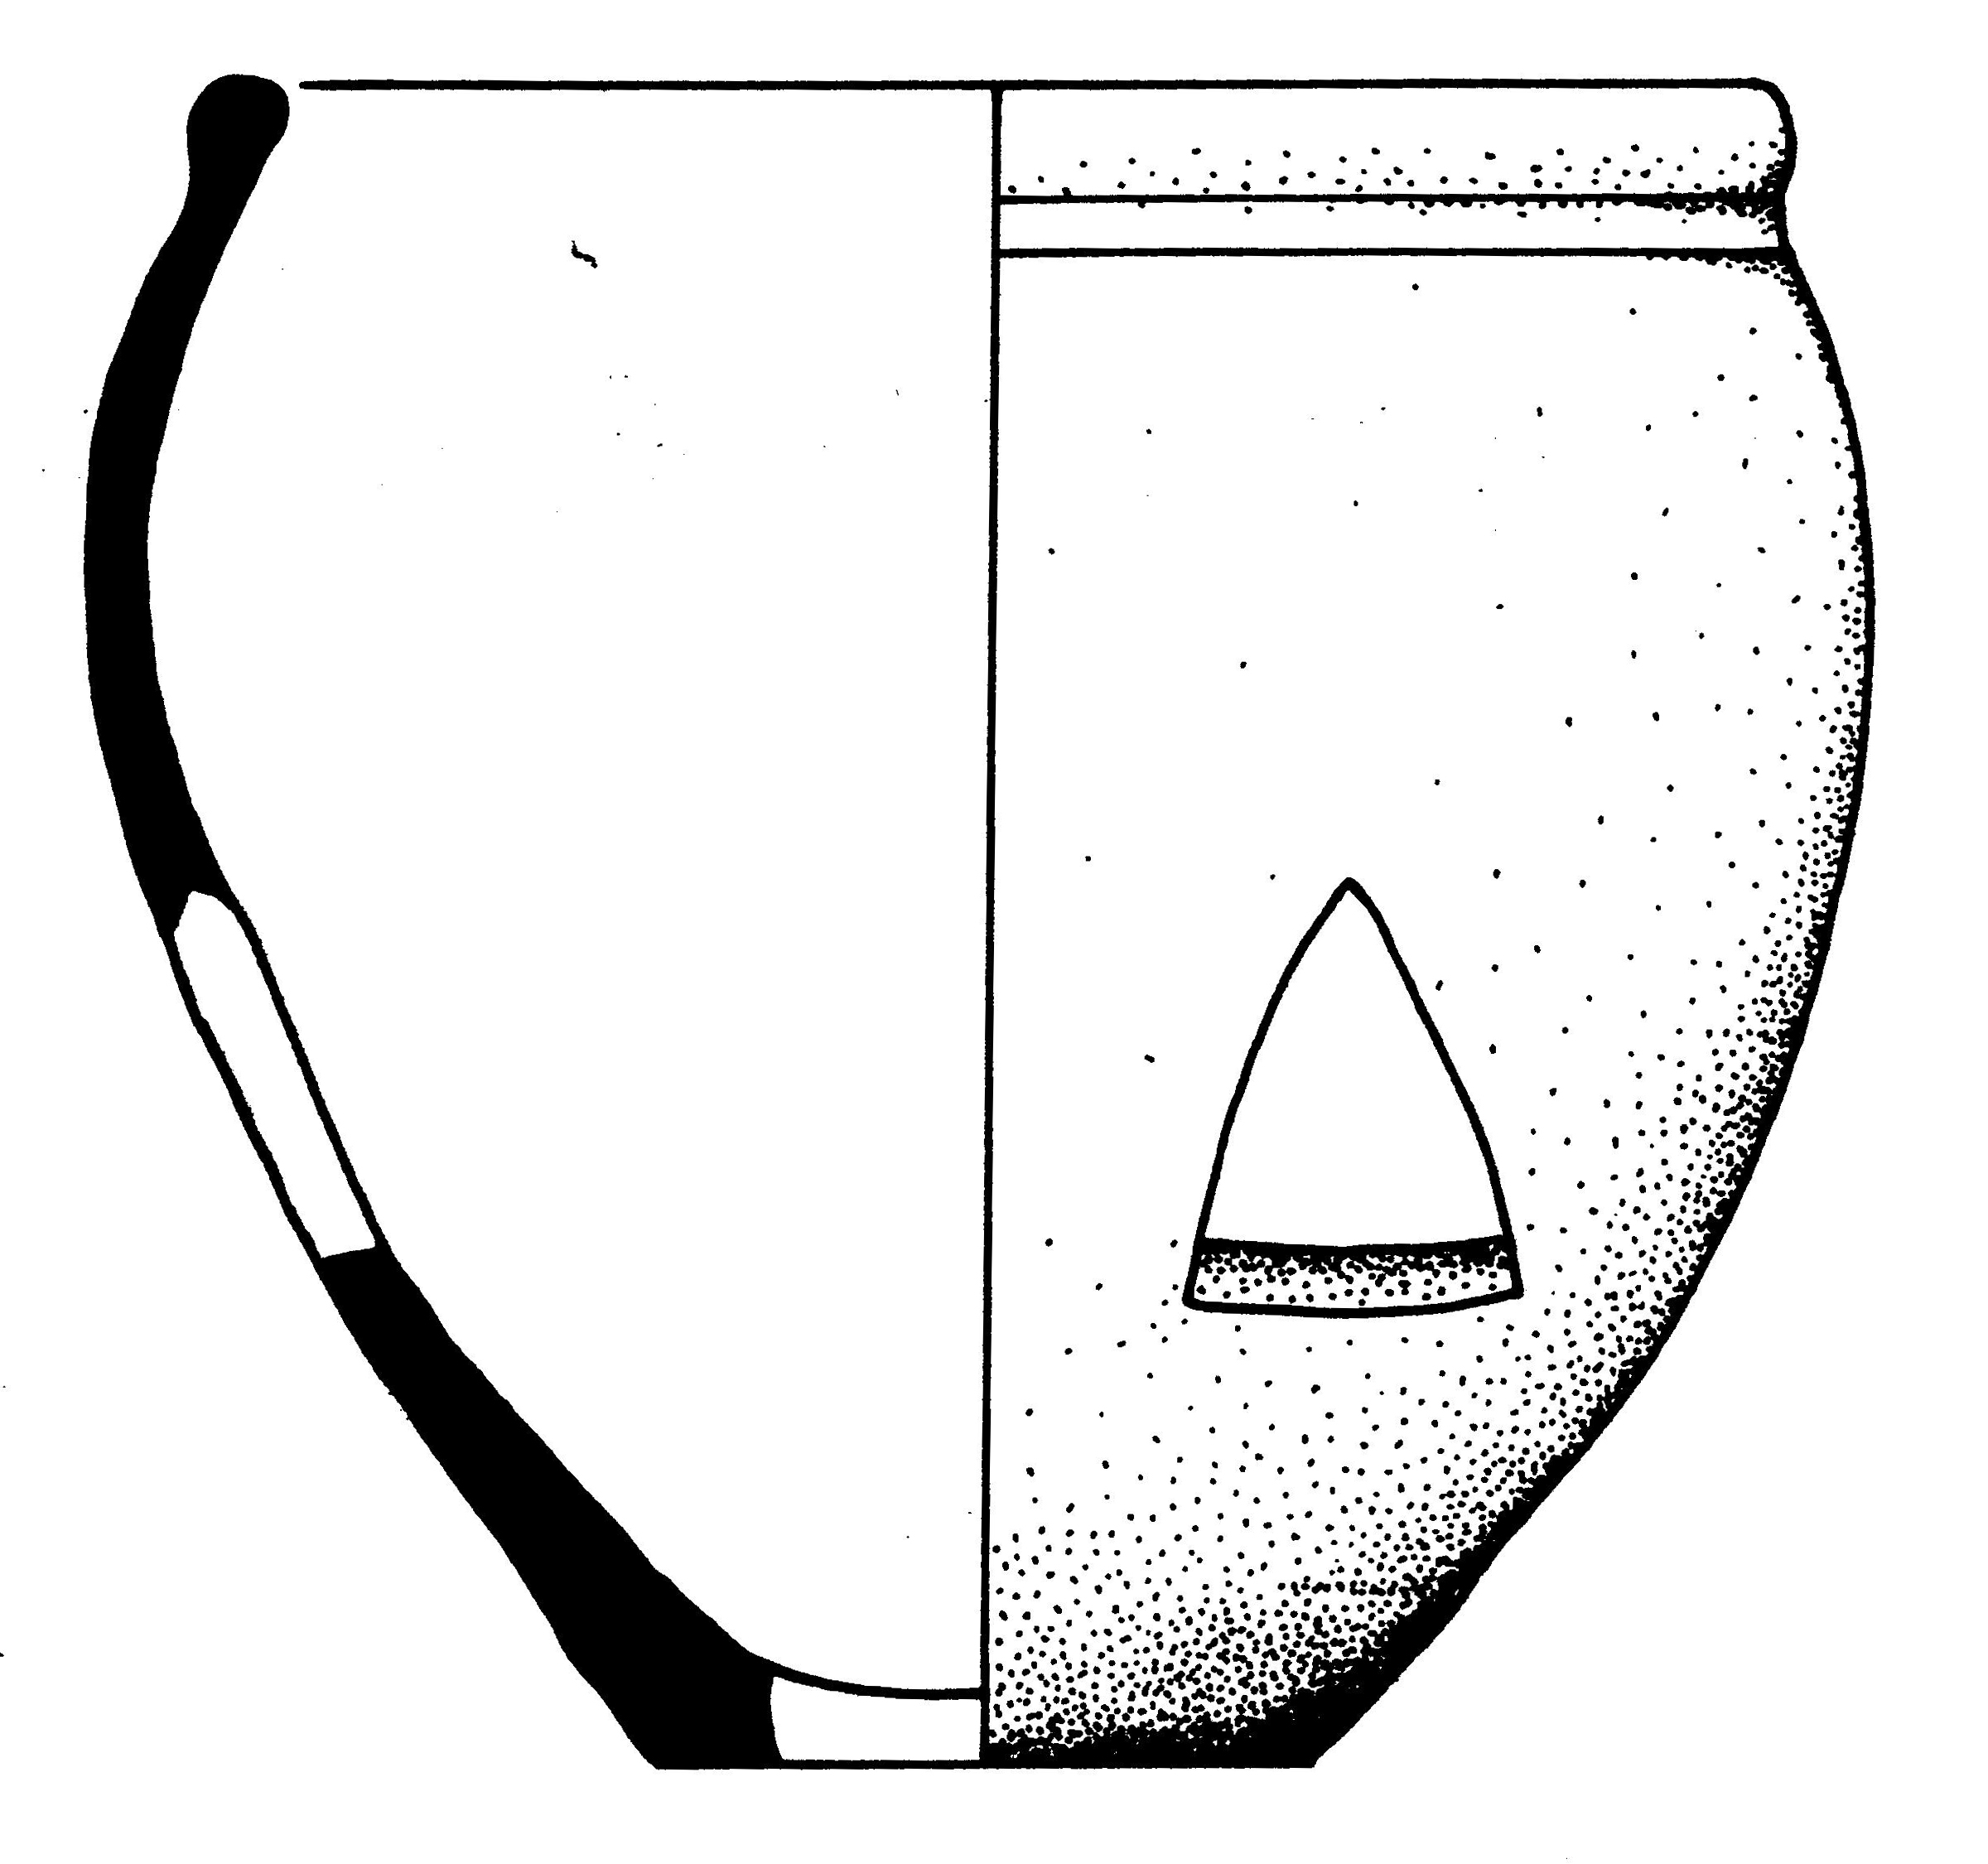 Fig. 2: Clay planting pot with cut-out holes. Adapted from Detsicas 1981, fig. 26.2.